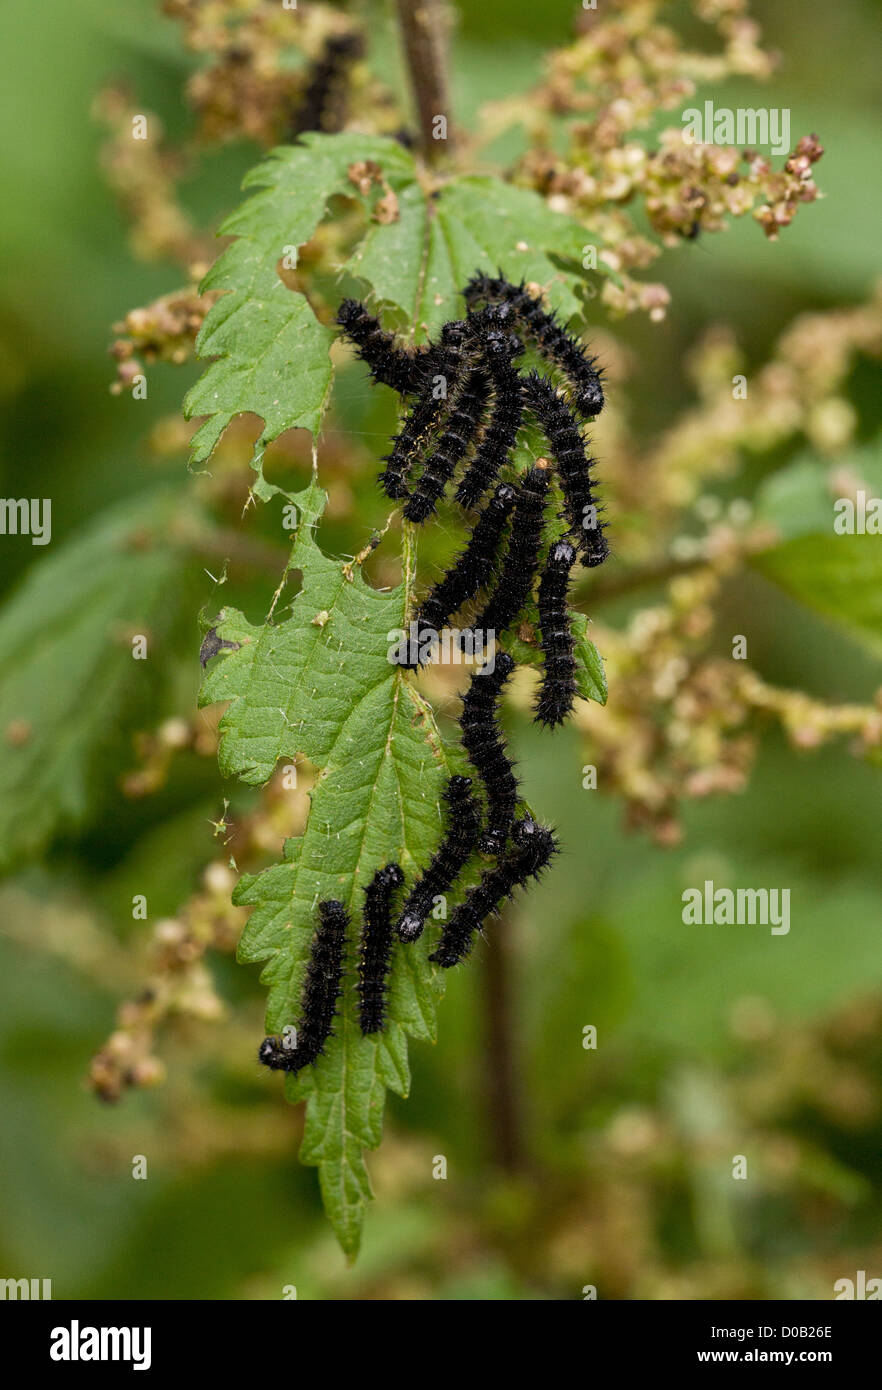 Larvae, or caterpillars, of Peacock butterflies (Inachis io) on Stinging Nettle leaves (Urtica dioica) close-up Stock Photo